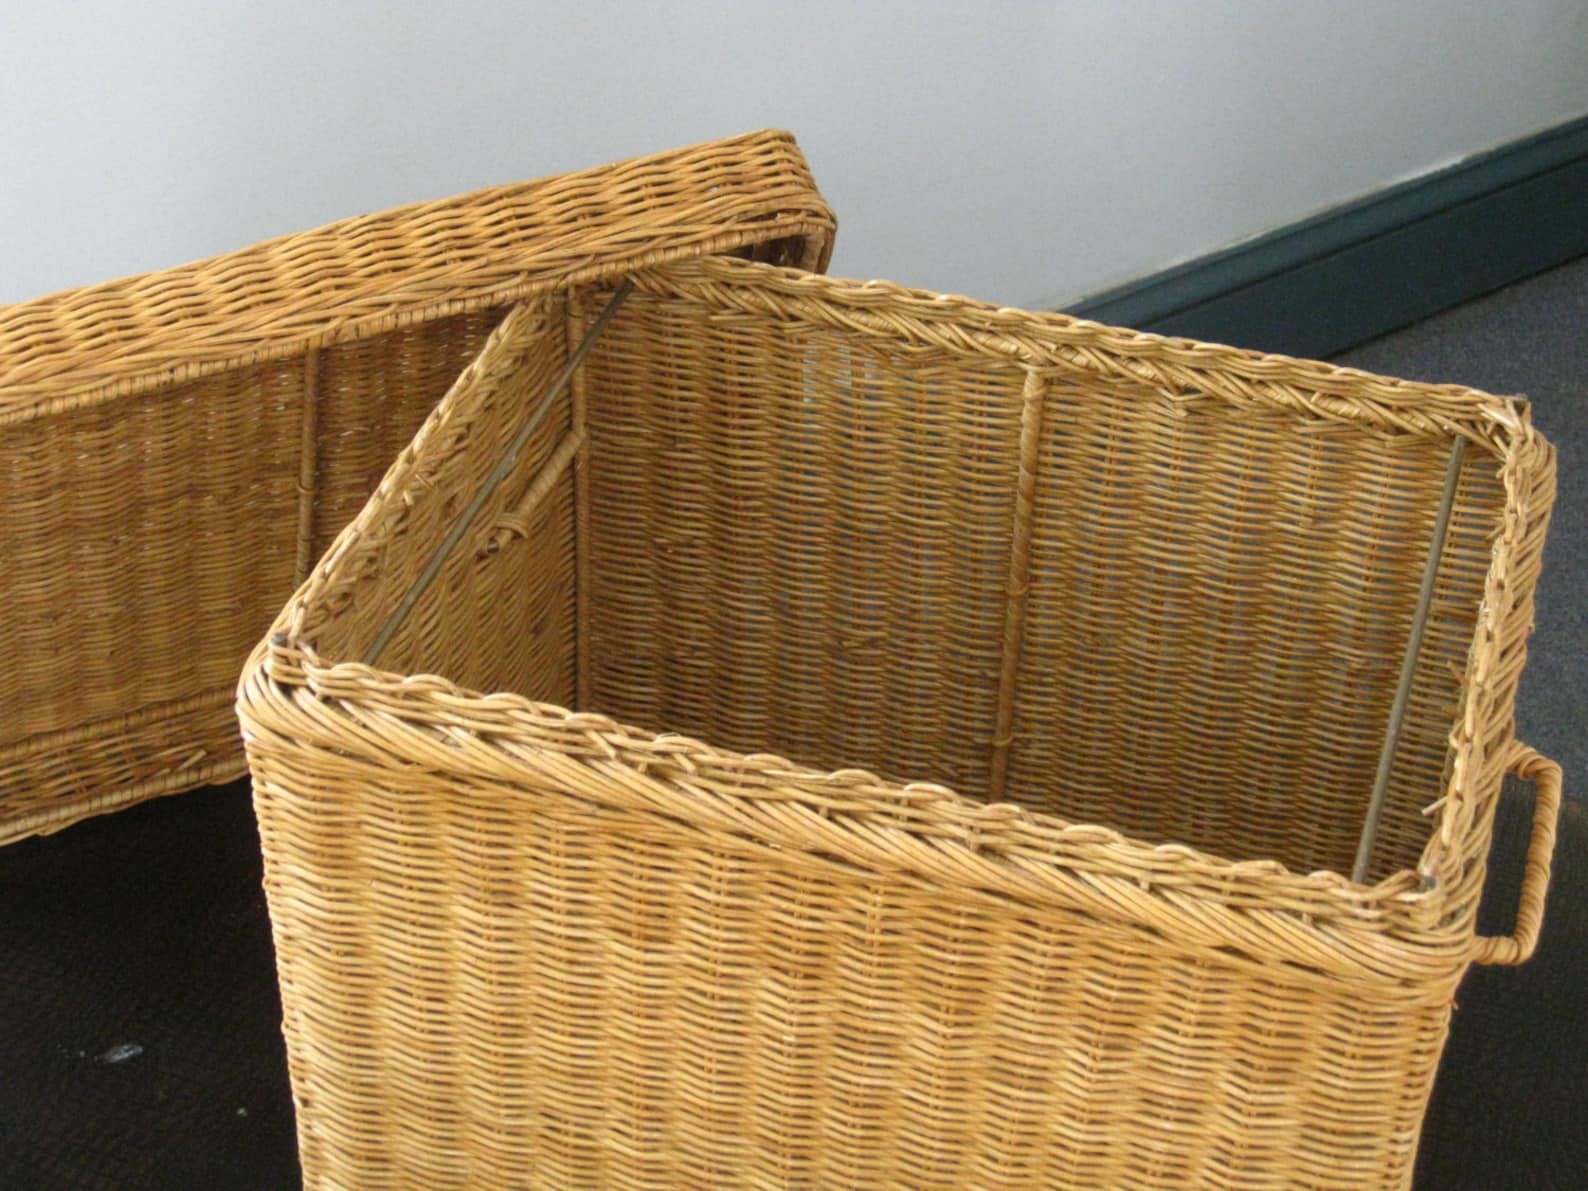 Vintage Rattan File Basket Wicker Box With Lid Home Office Etsy